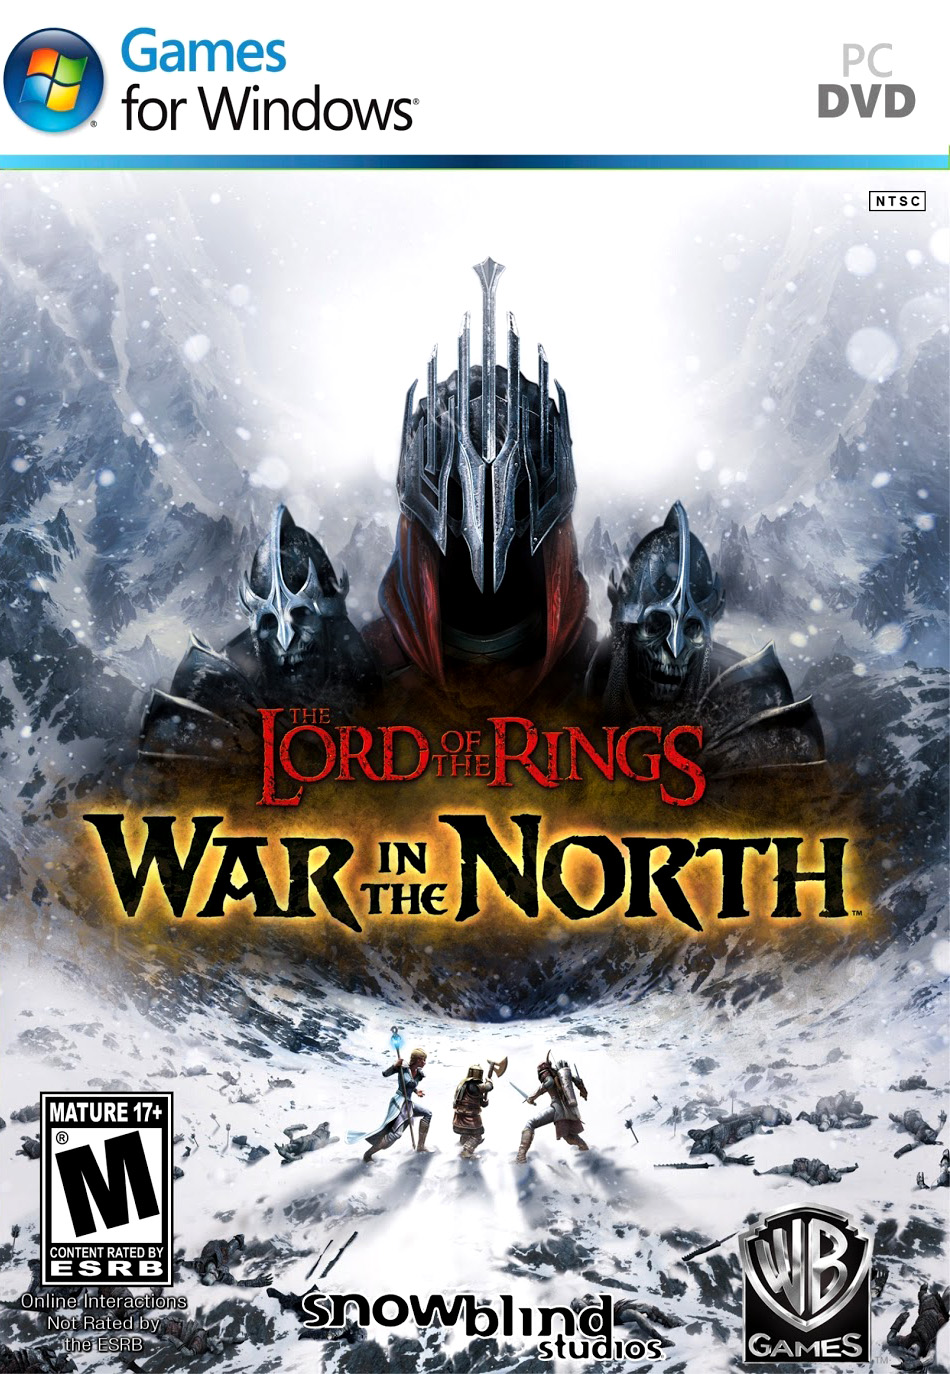 The lord of the rings war in the north купить ключ steam фото 67